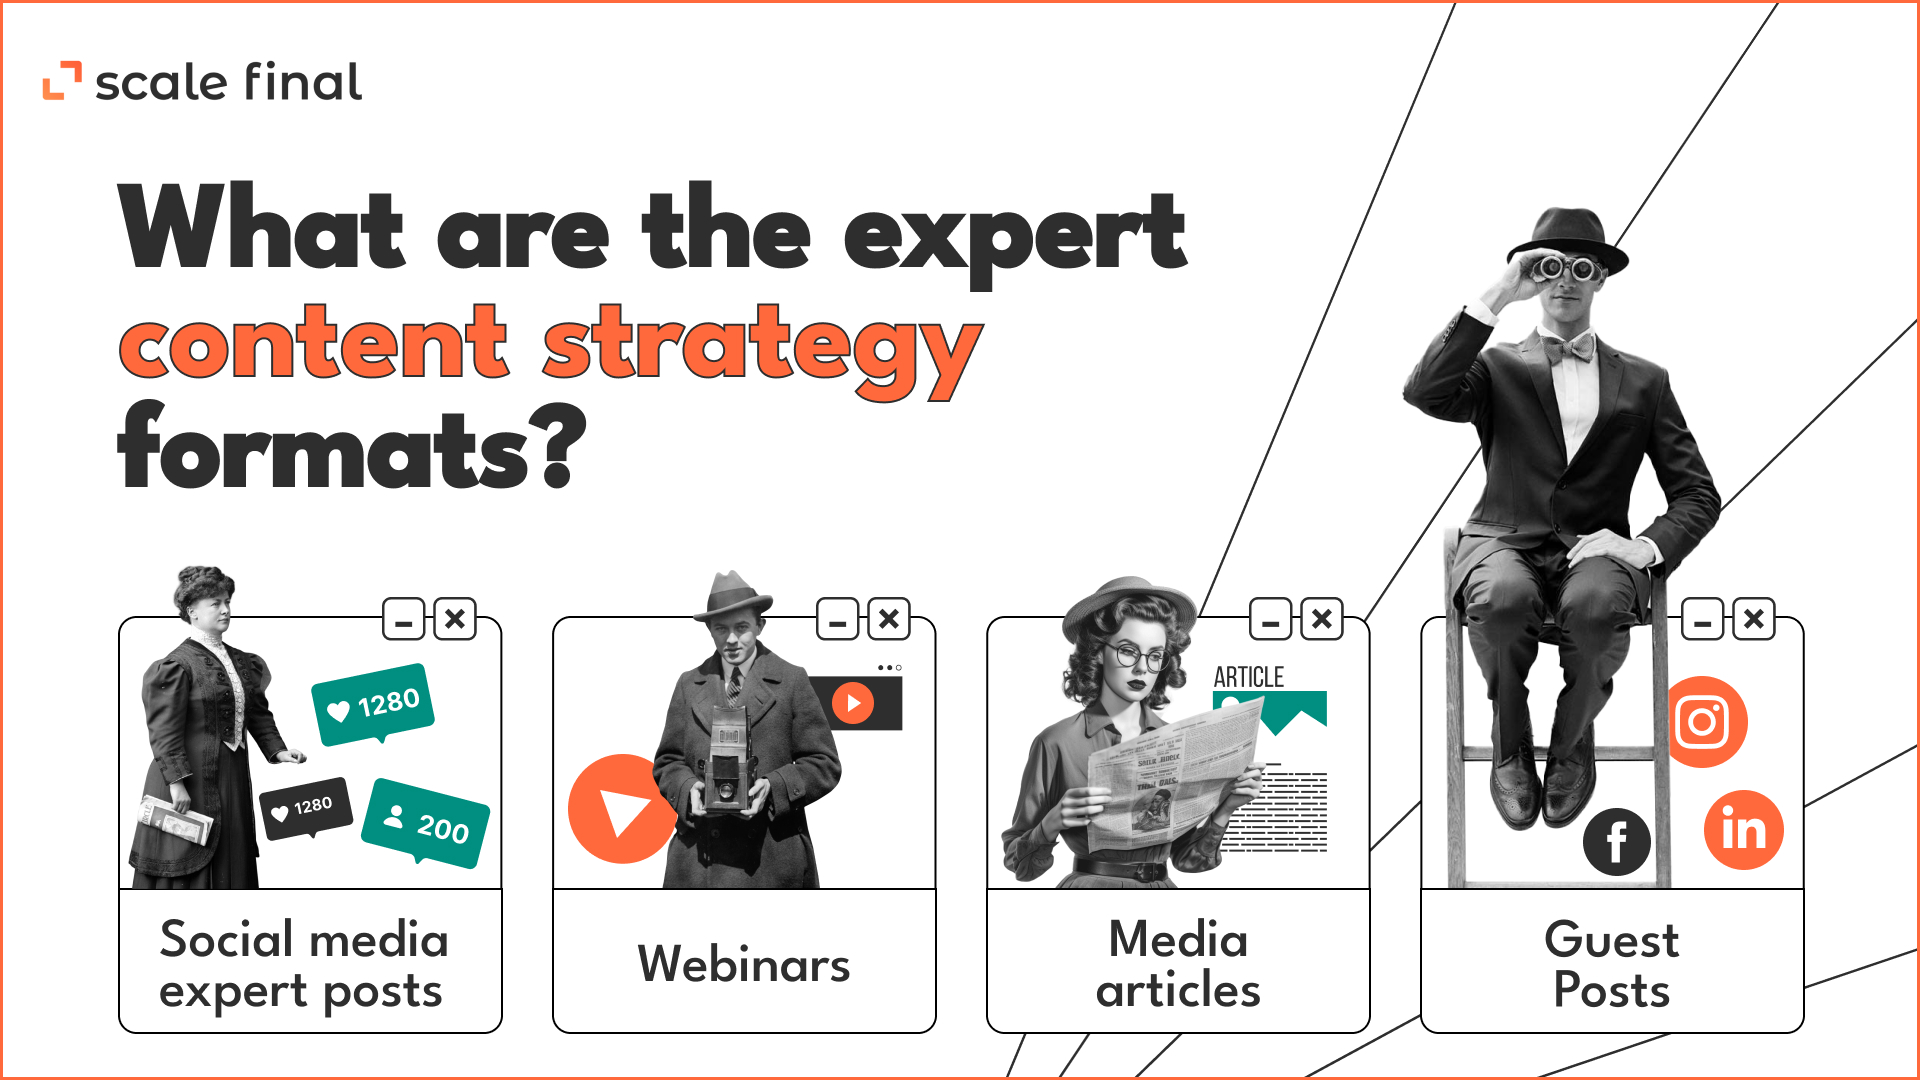 What are the expert content strategy formats? Social media expert postsWebinarsMedia articlesGuest Posts